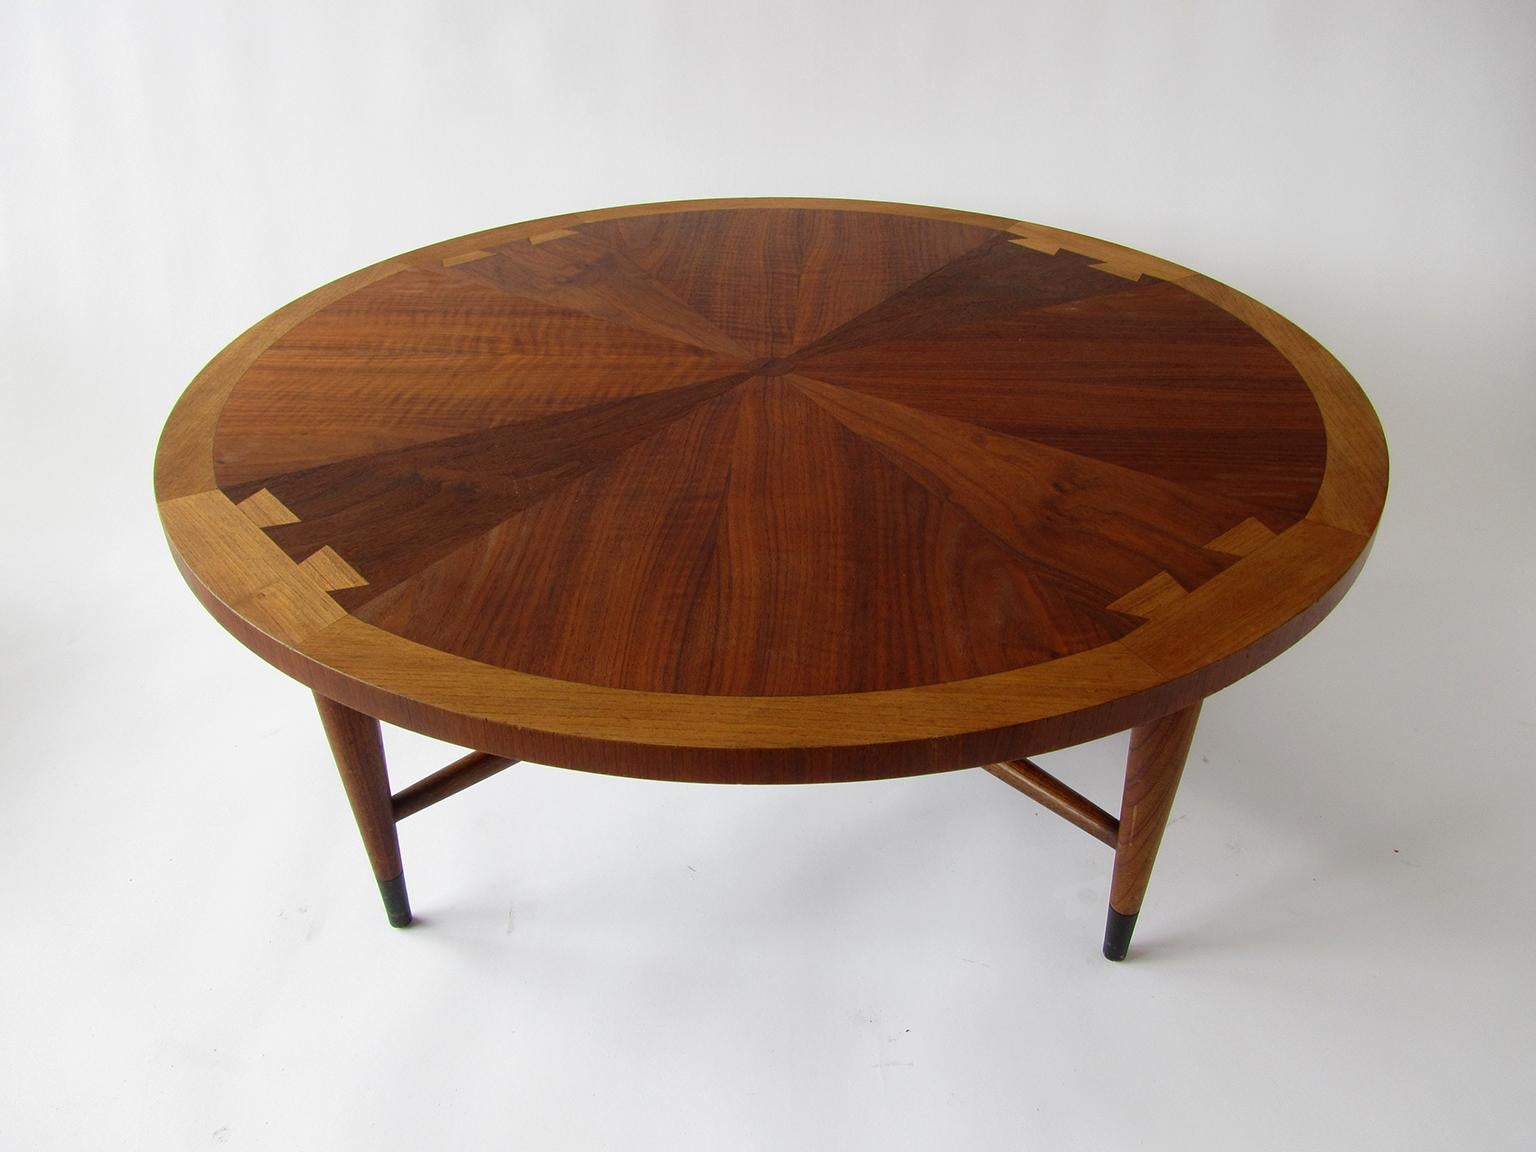 The circular top with alternating woods on tapering legs, marked Lane.